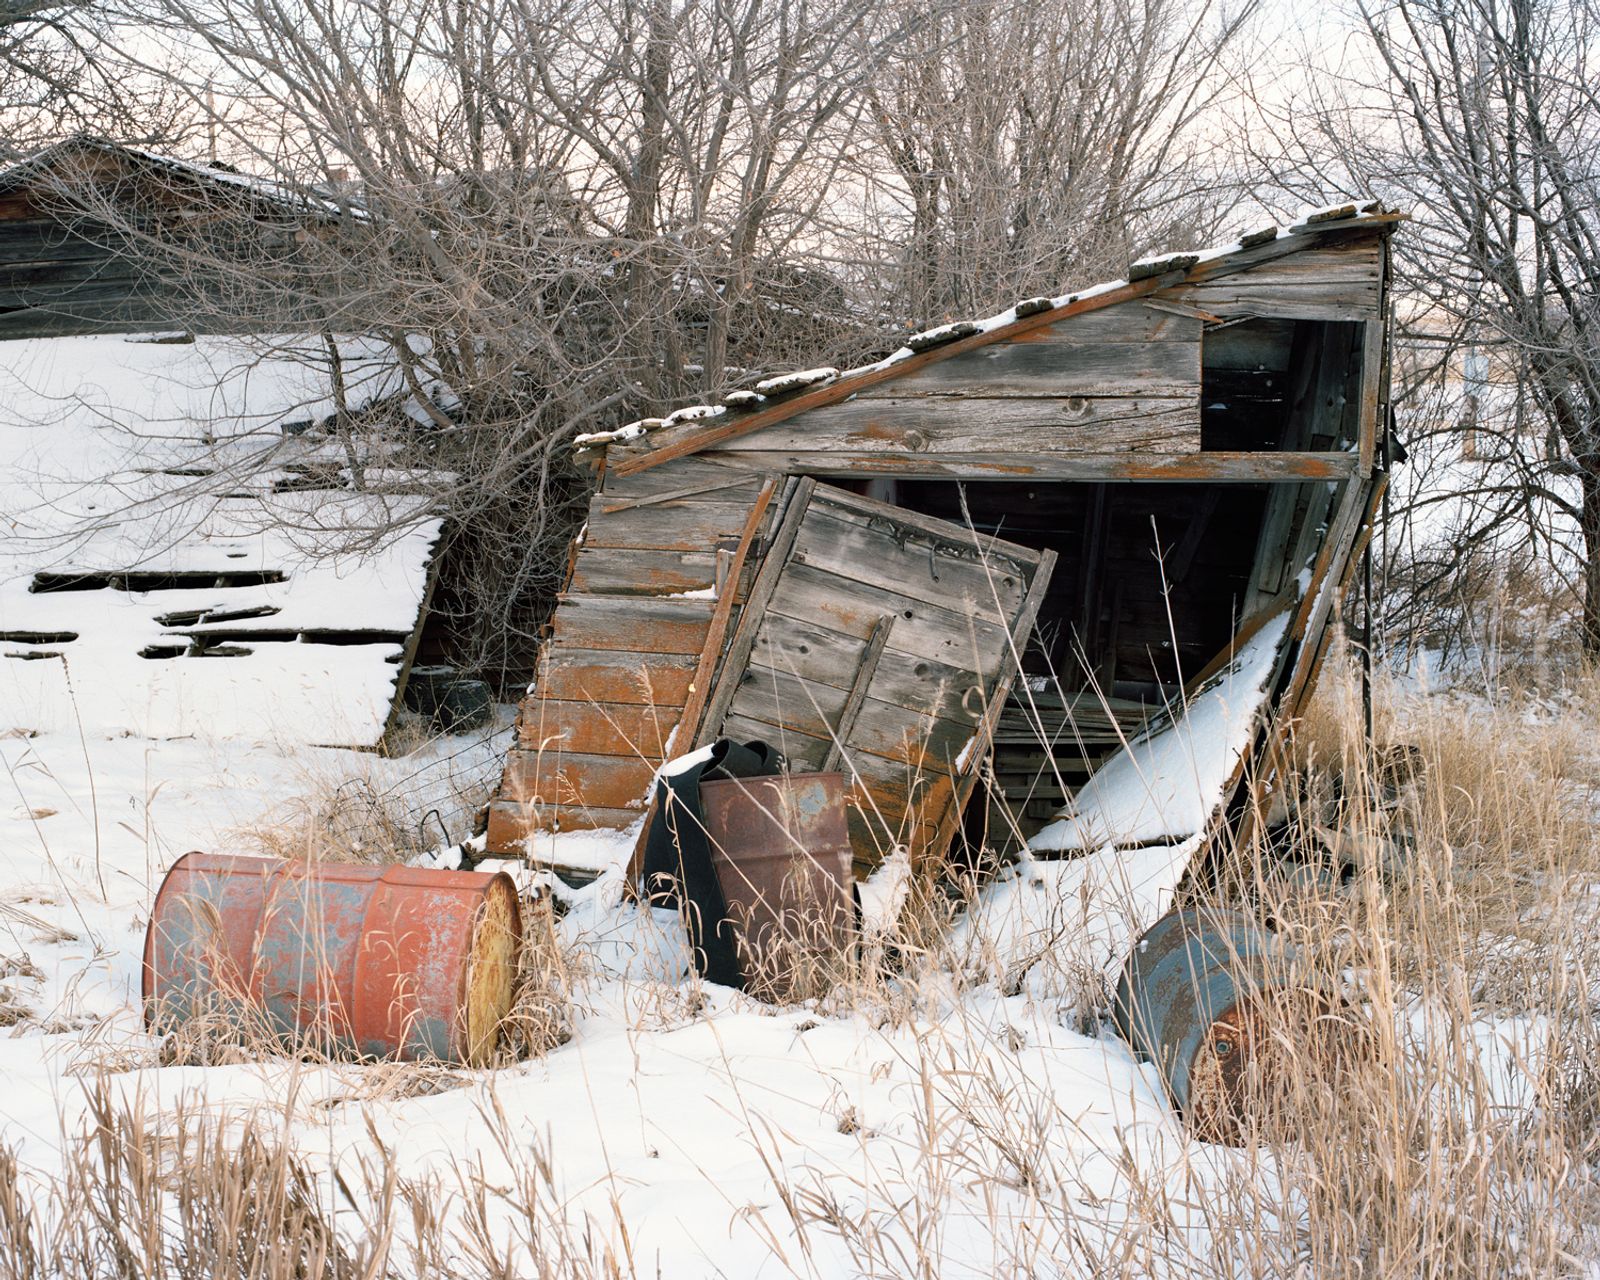 © Sarah Christianson - Abandoned shed and oil drums at my great-grandparents' homestead, January 2015.